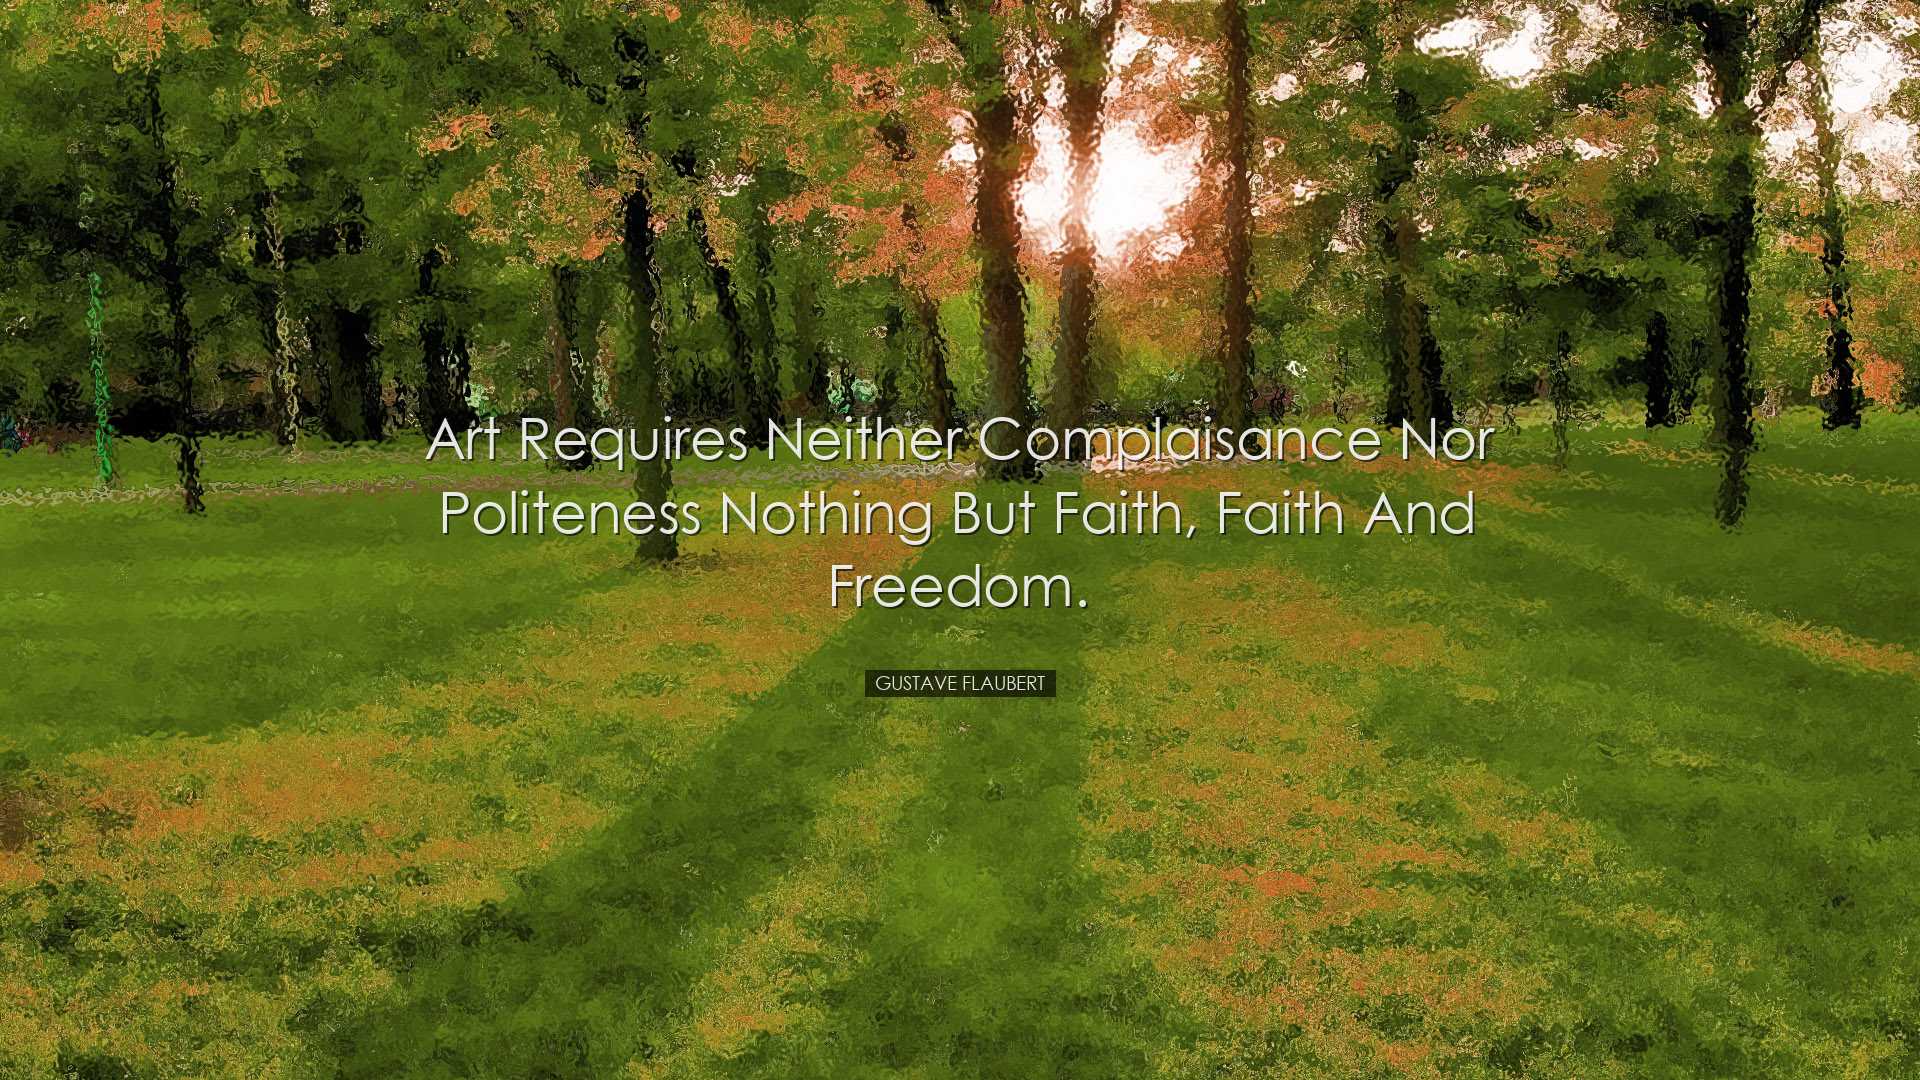 Art requires neither complaisance nor politeness nothing but faith